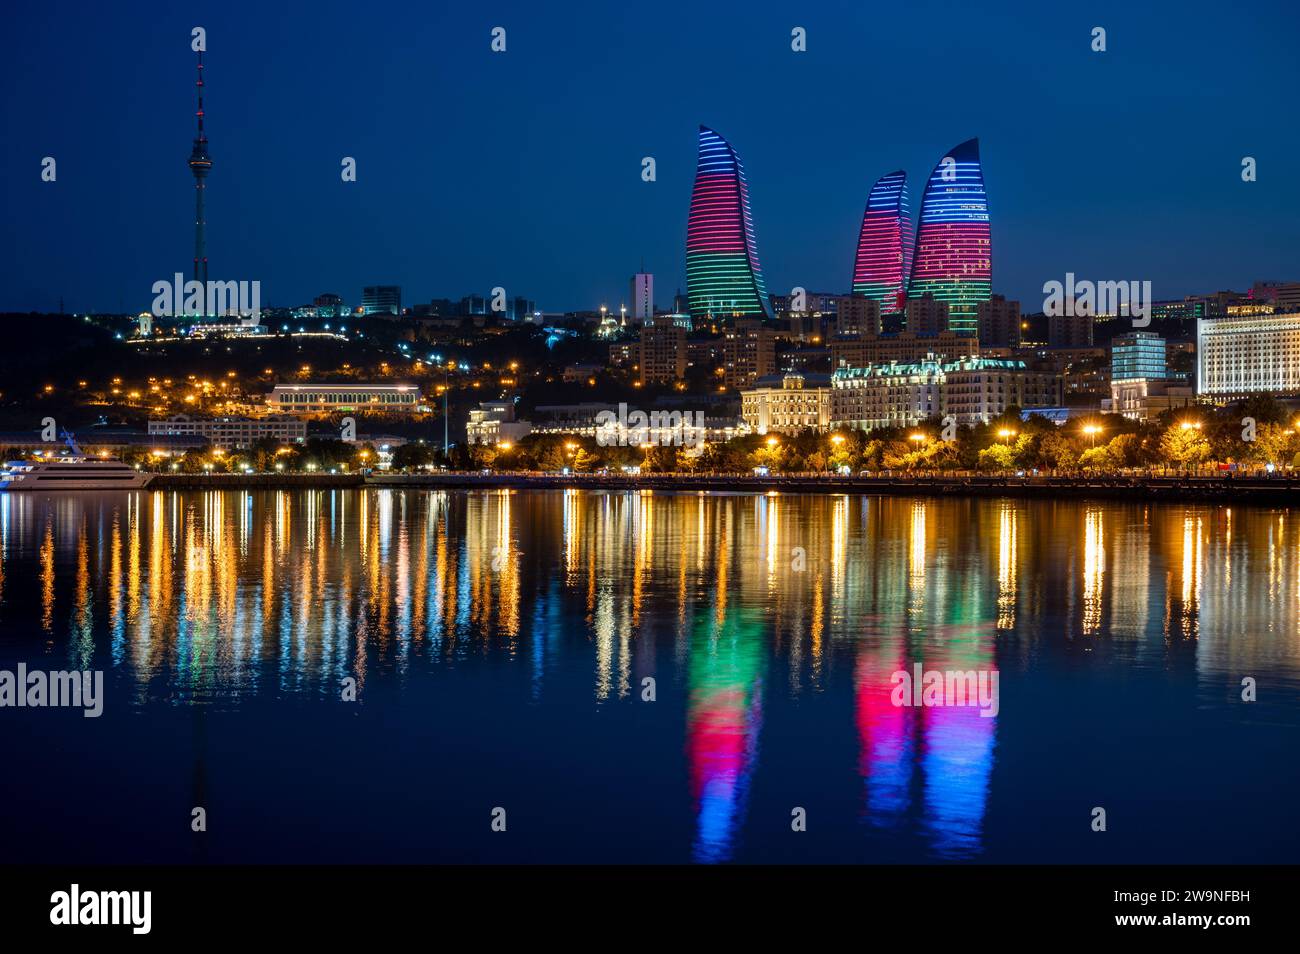 Night view of the the skyline of Baku, capital city of Azerbaijan with reflection of the Flame Towers in the waters of the Caspian Sea. Stock Photo